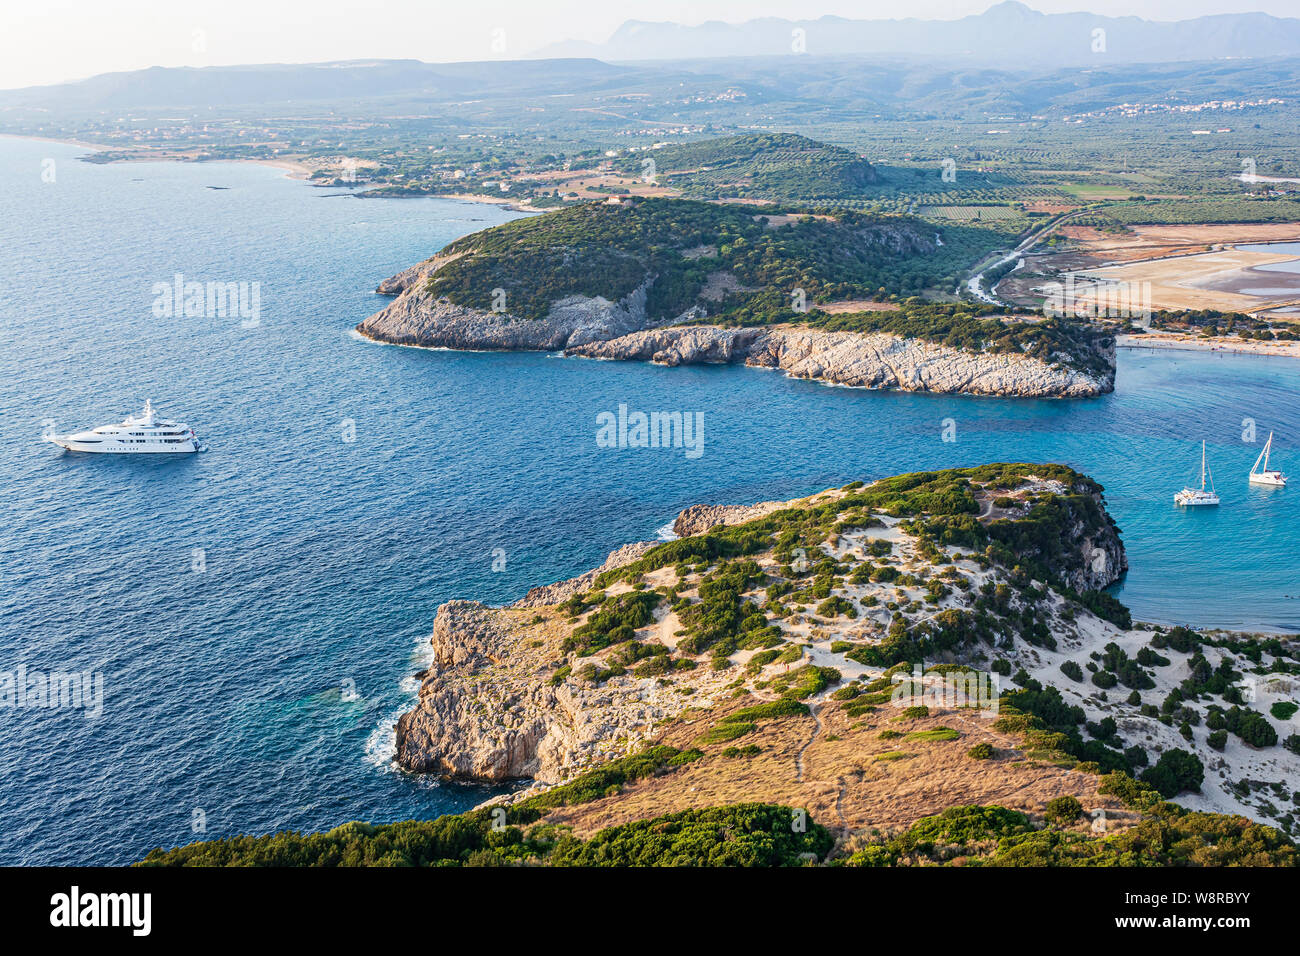 View of Voidokilia beach in the Peloponnese region of Greece, from the Palaiokastro (old Navarino Castle). Stock Photo